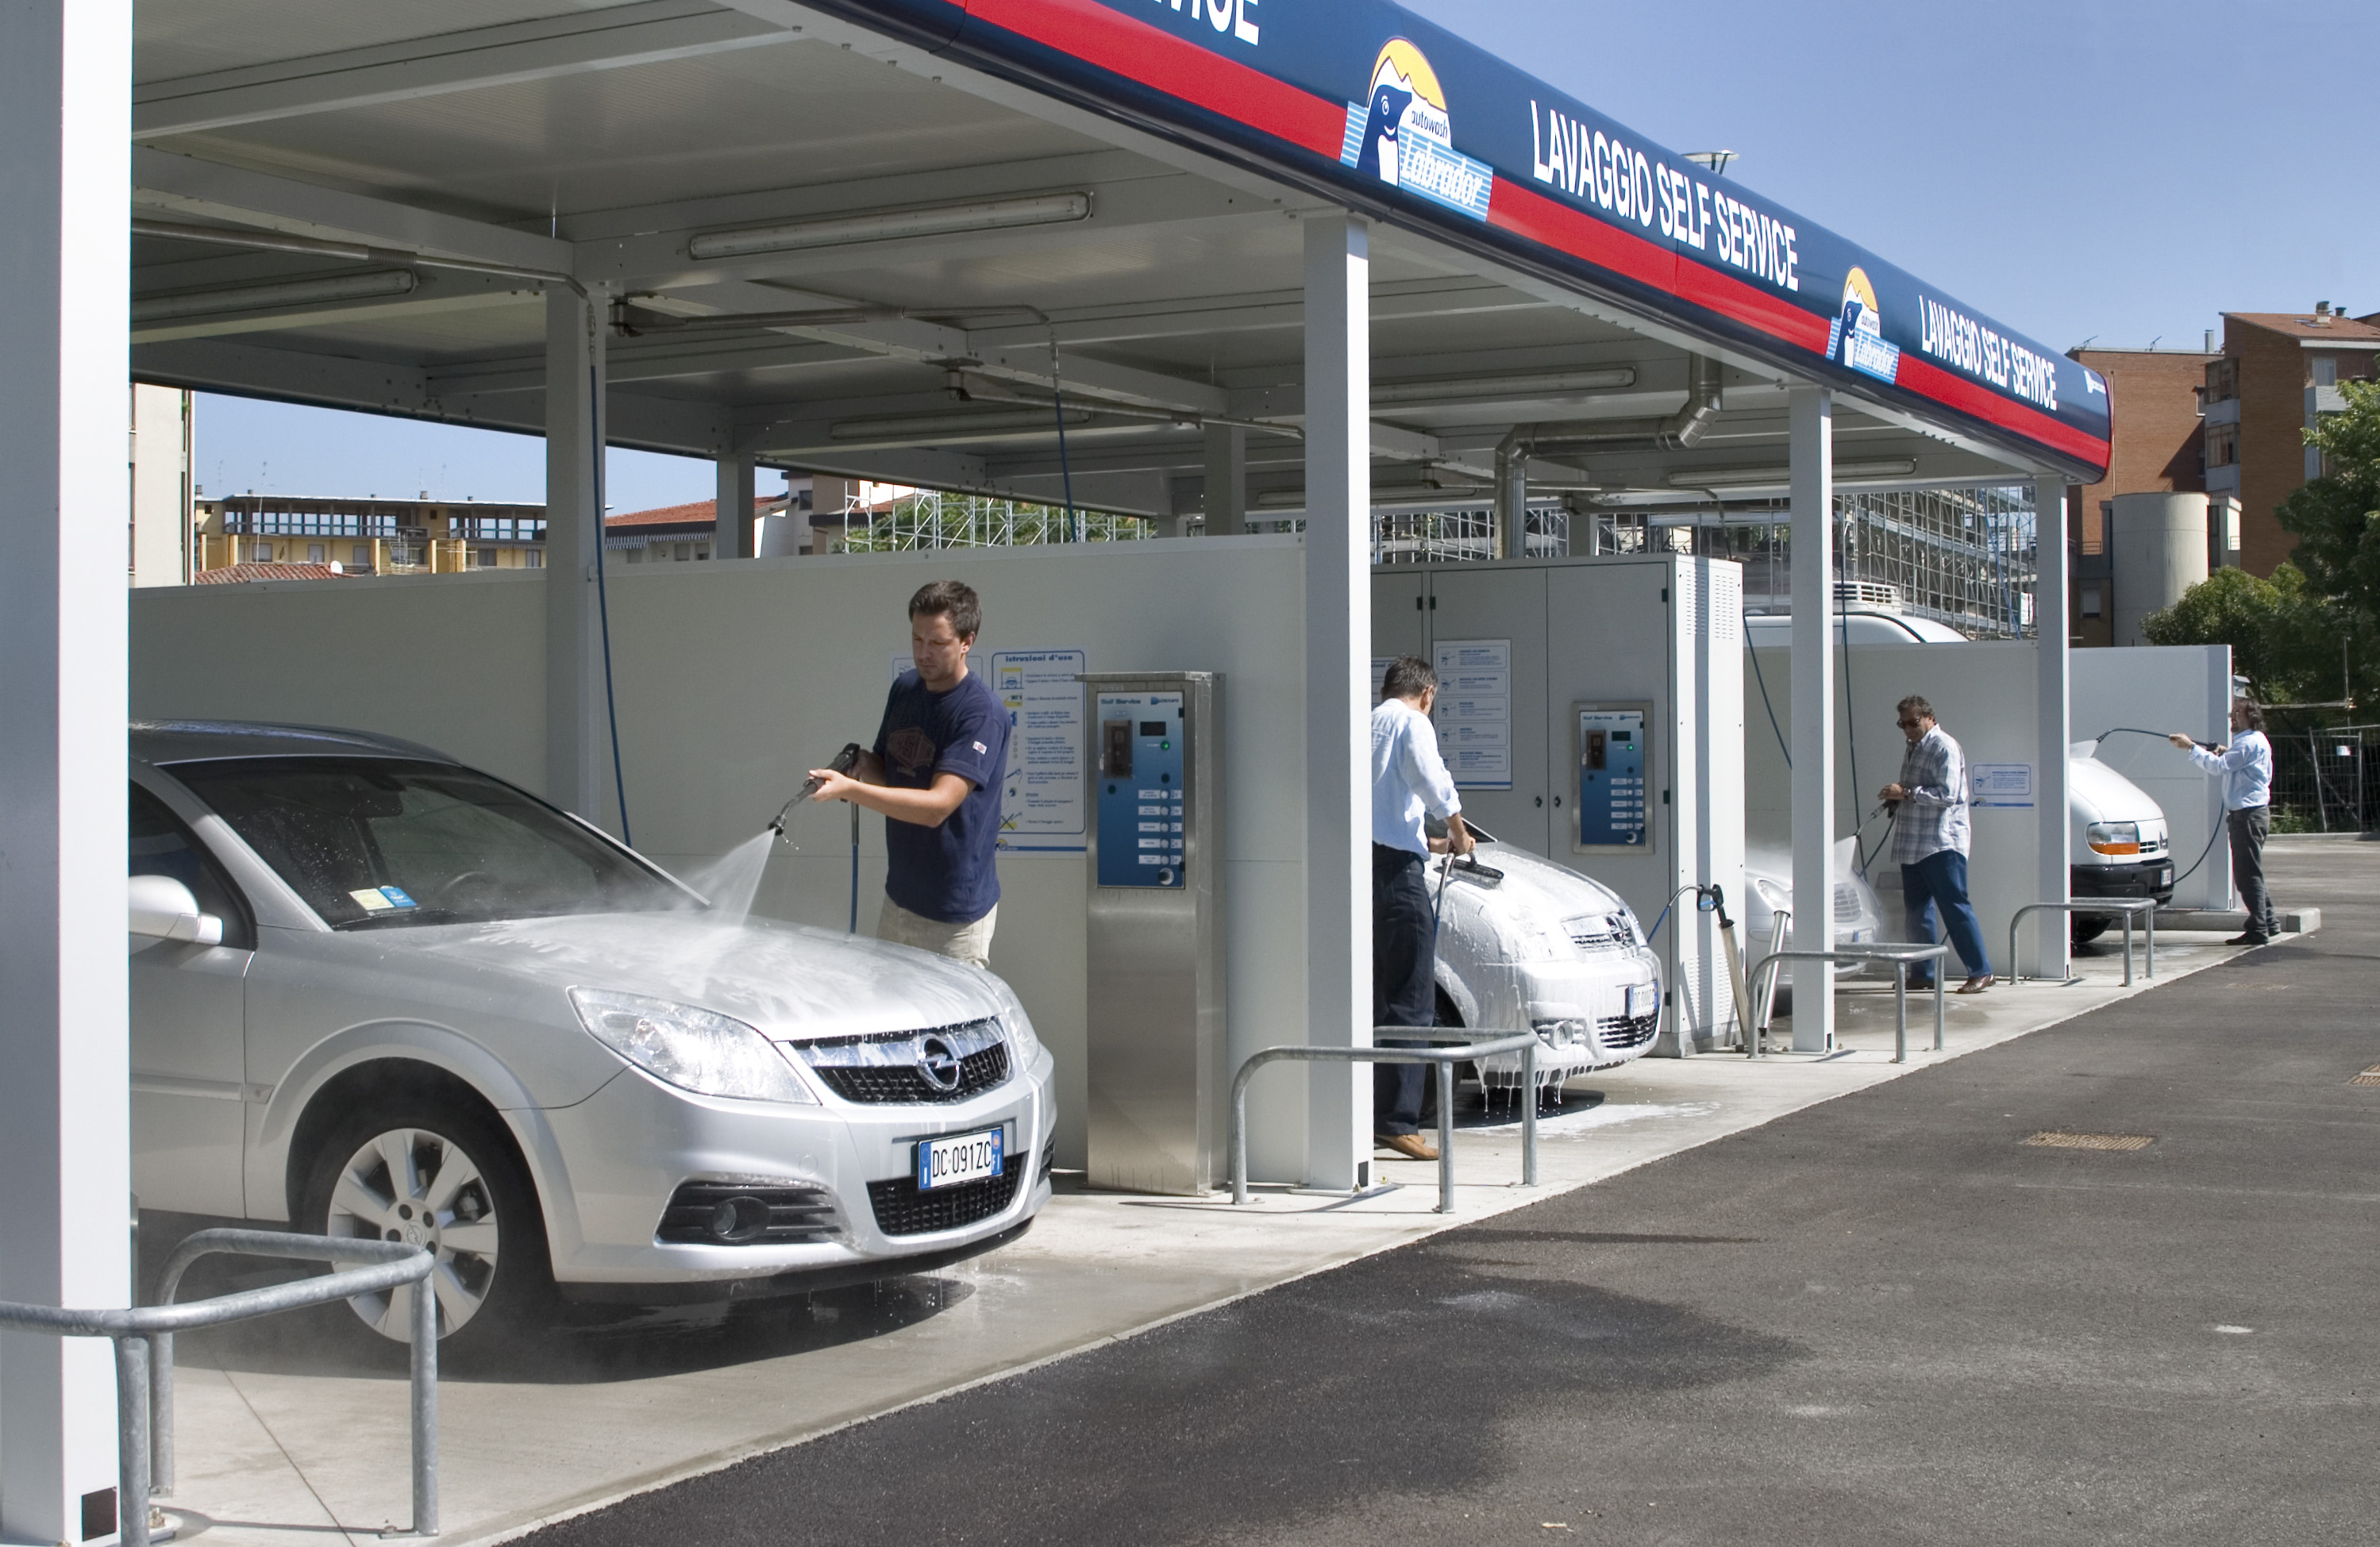 Automatic Car Wash Systems